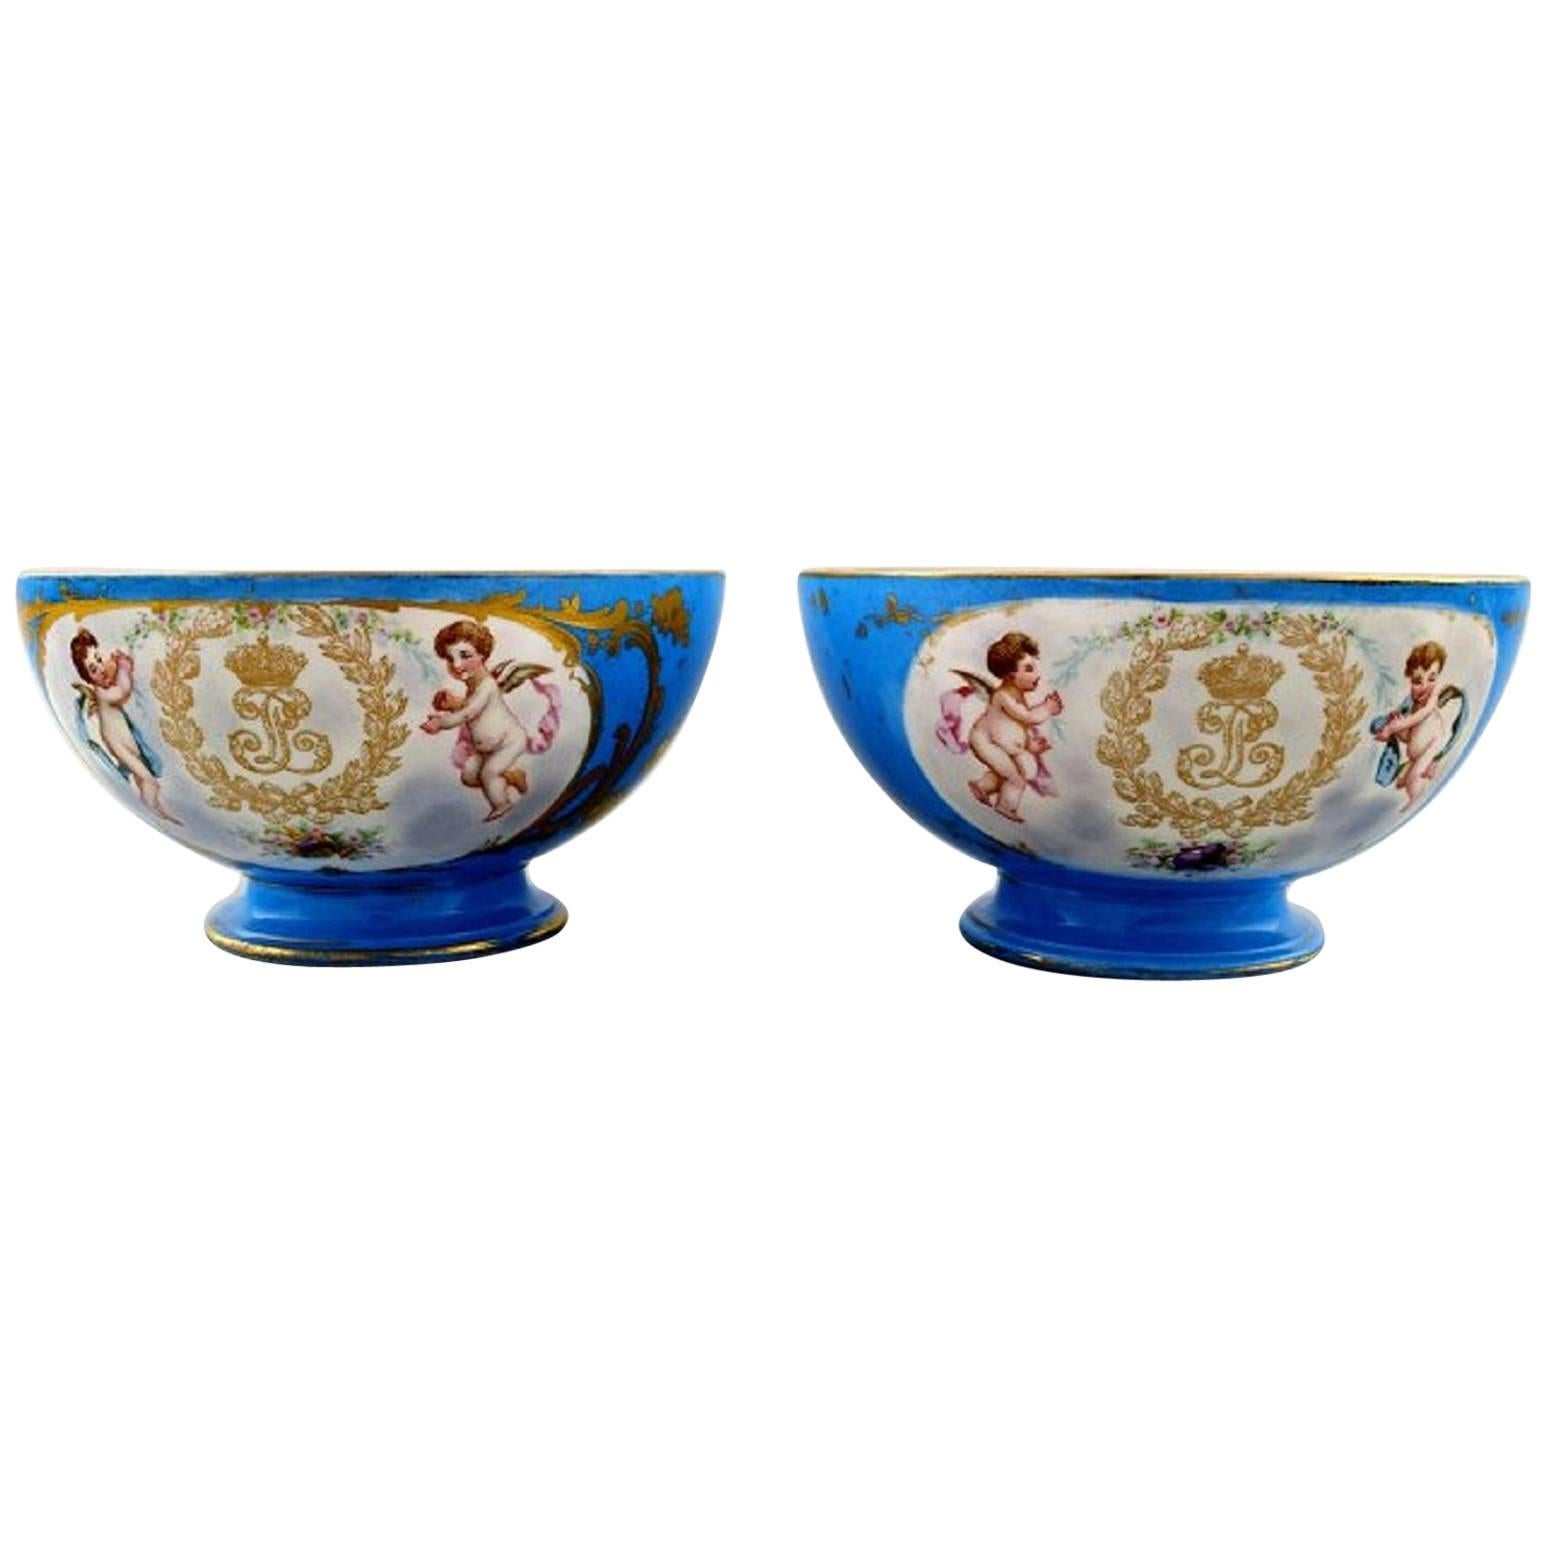 Sevres, Chateau Des Tuileries, France, a Pair of Bowls in Sevres Blue